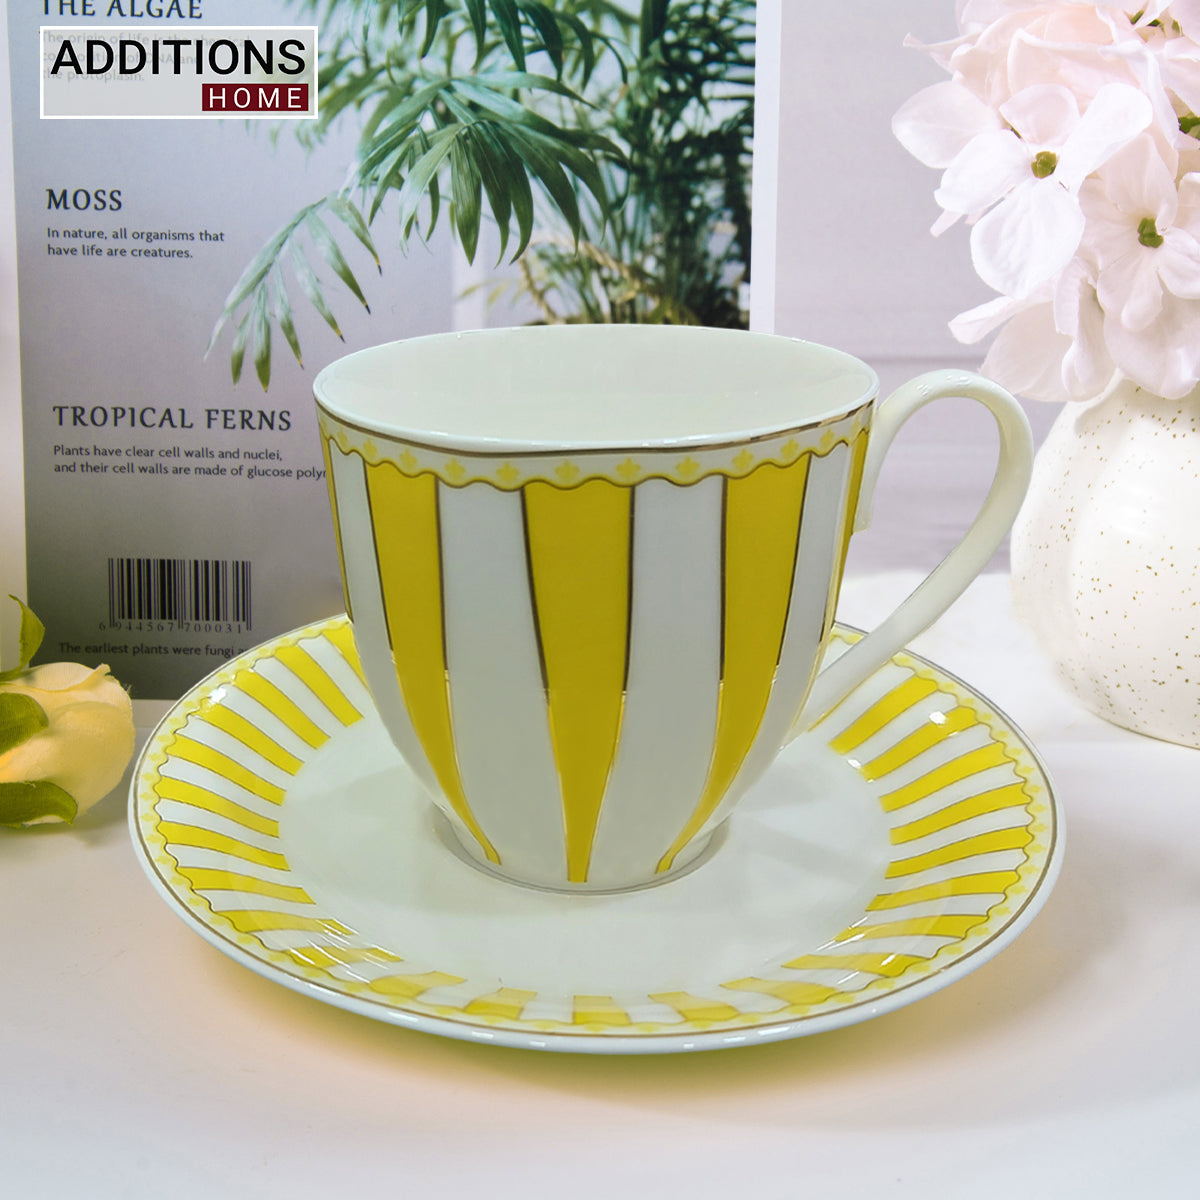 American Brunswick  Luxury Cup and Saucer Set Classic Stripe Porcelain (Set of 6)